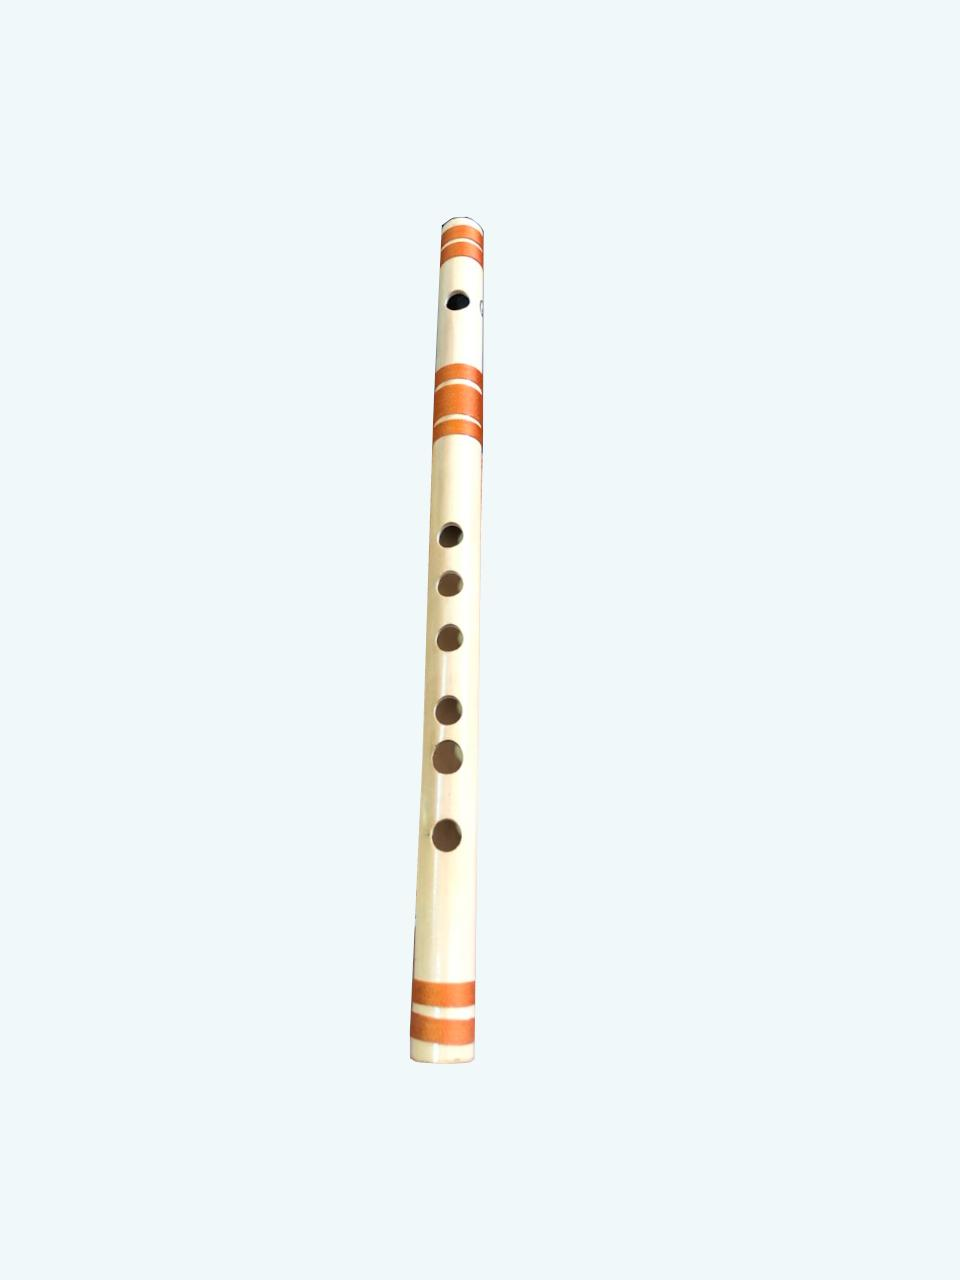 Bamboo flute in Nepal